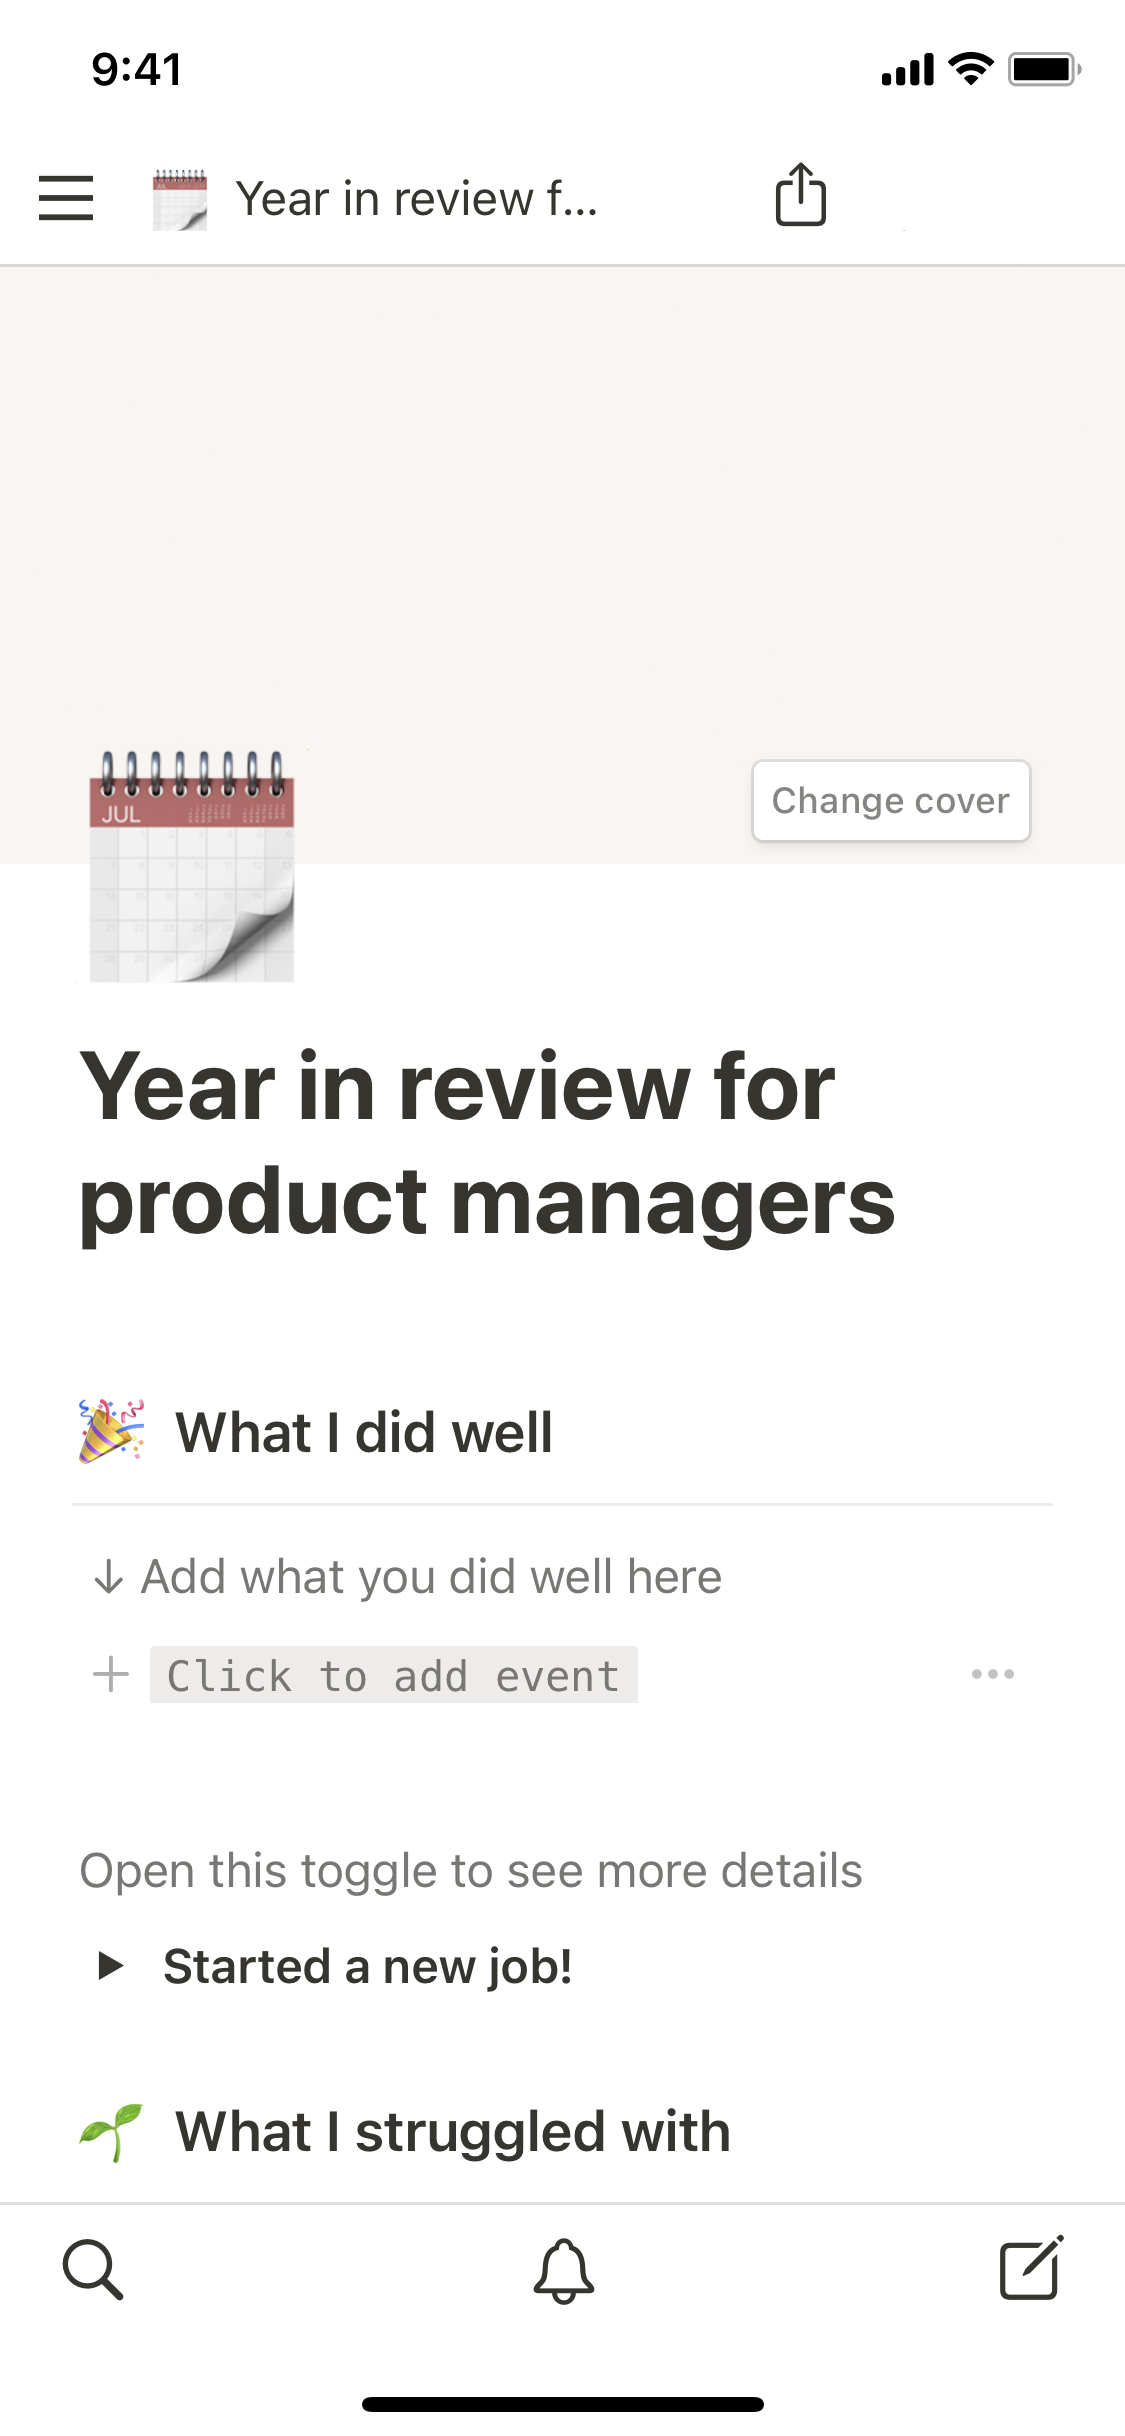 The mobile image for the Year in review for product managers template